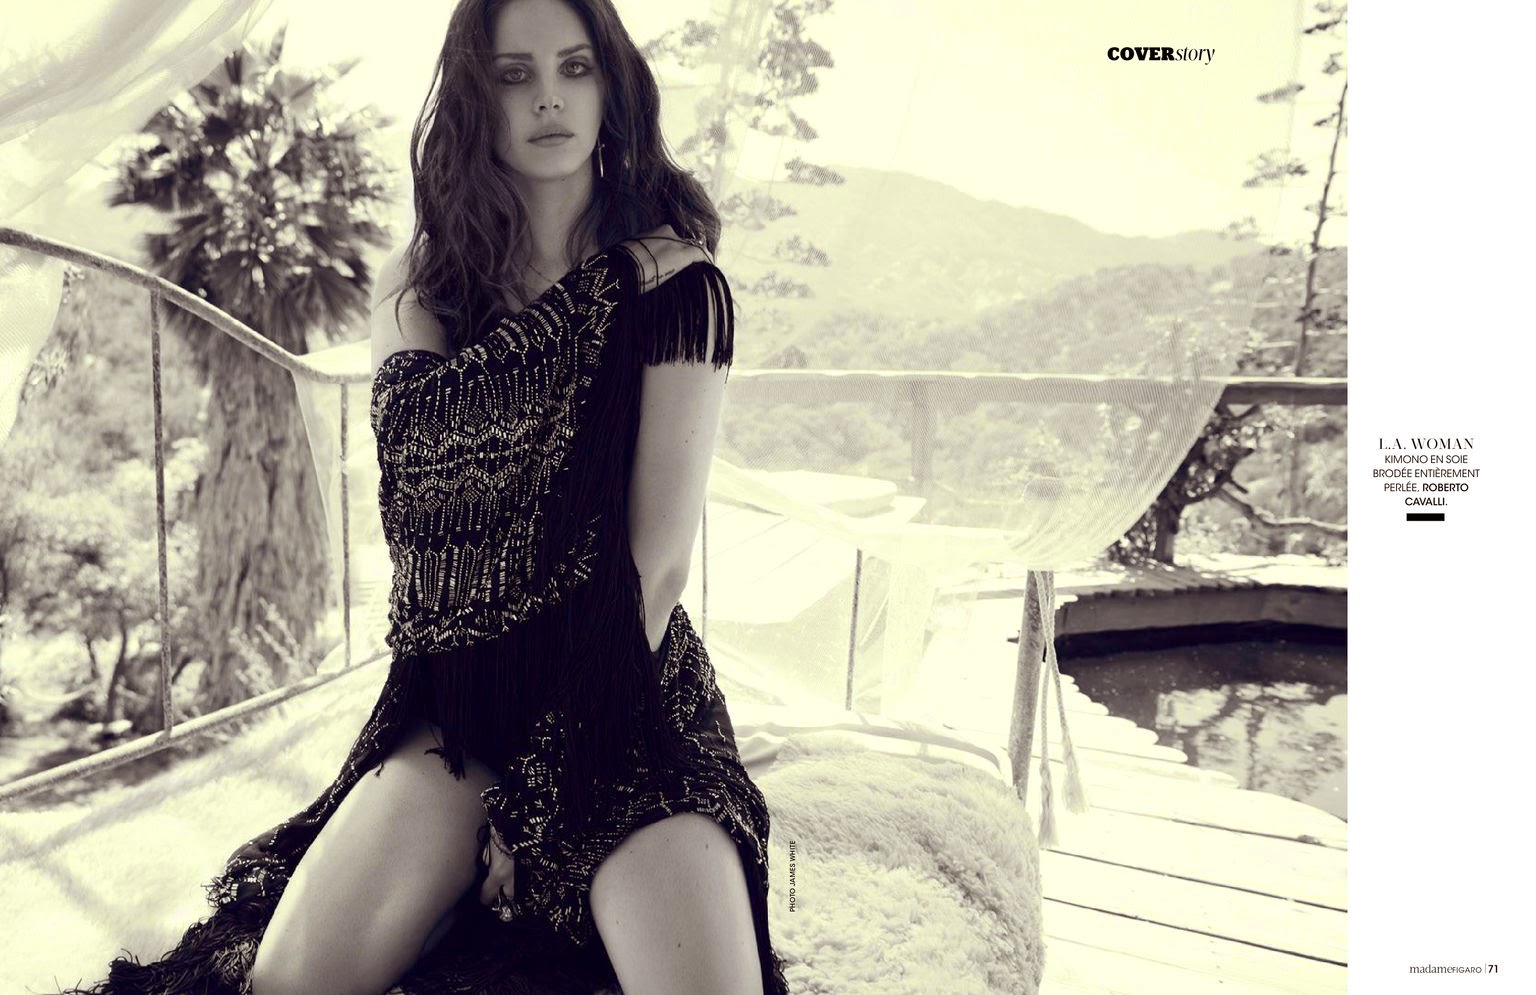 Lana Del Rey for Madame Figaro June 2014 | the CITIZENS of FASHION1536 x 995